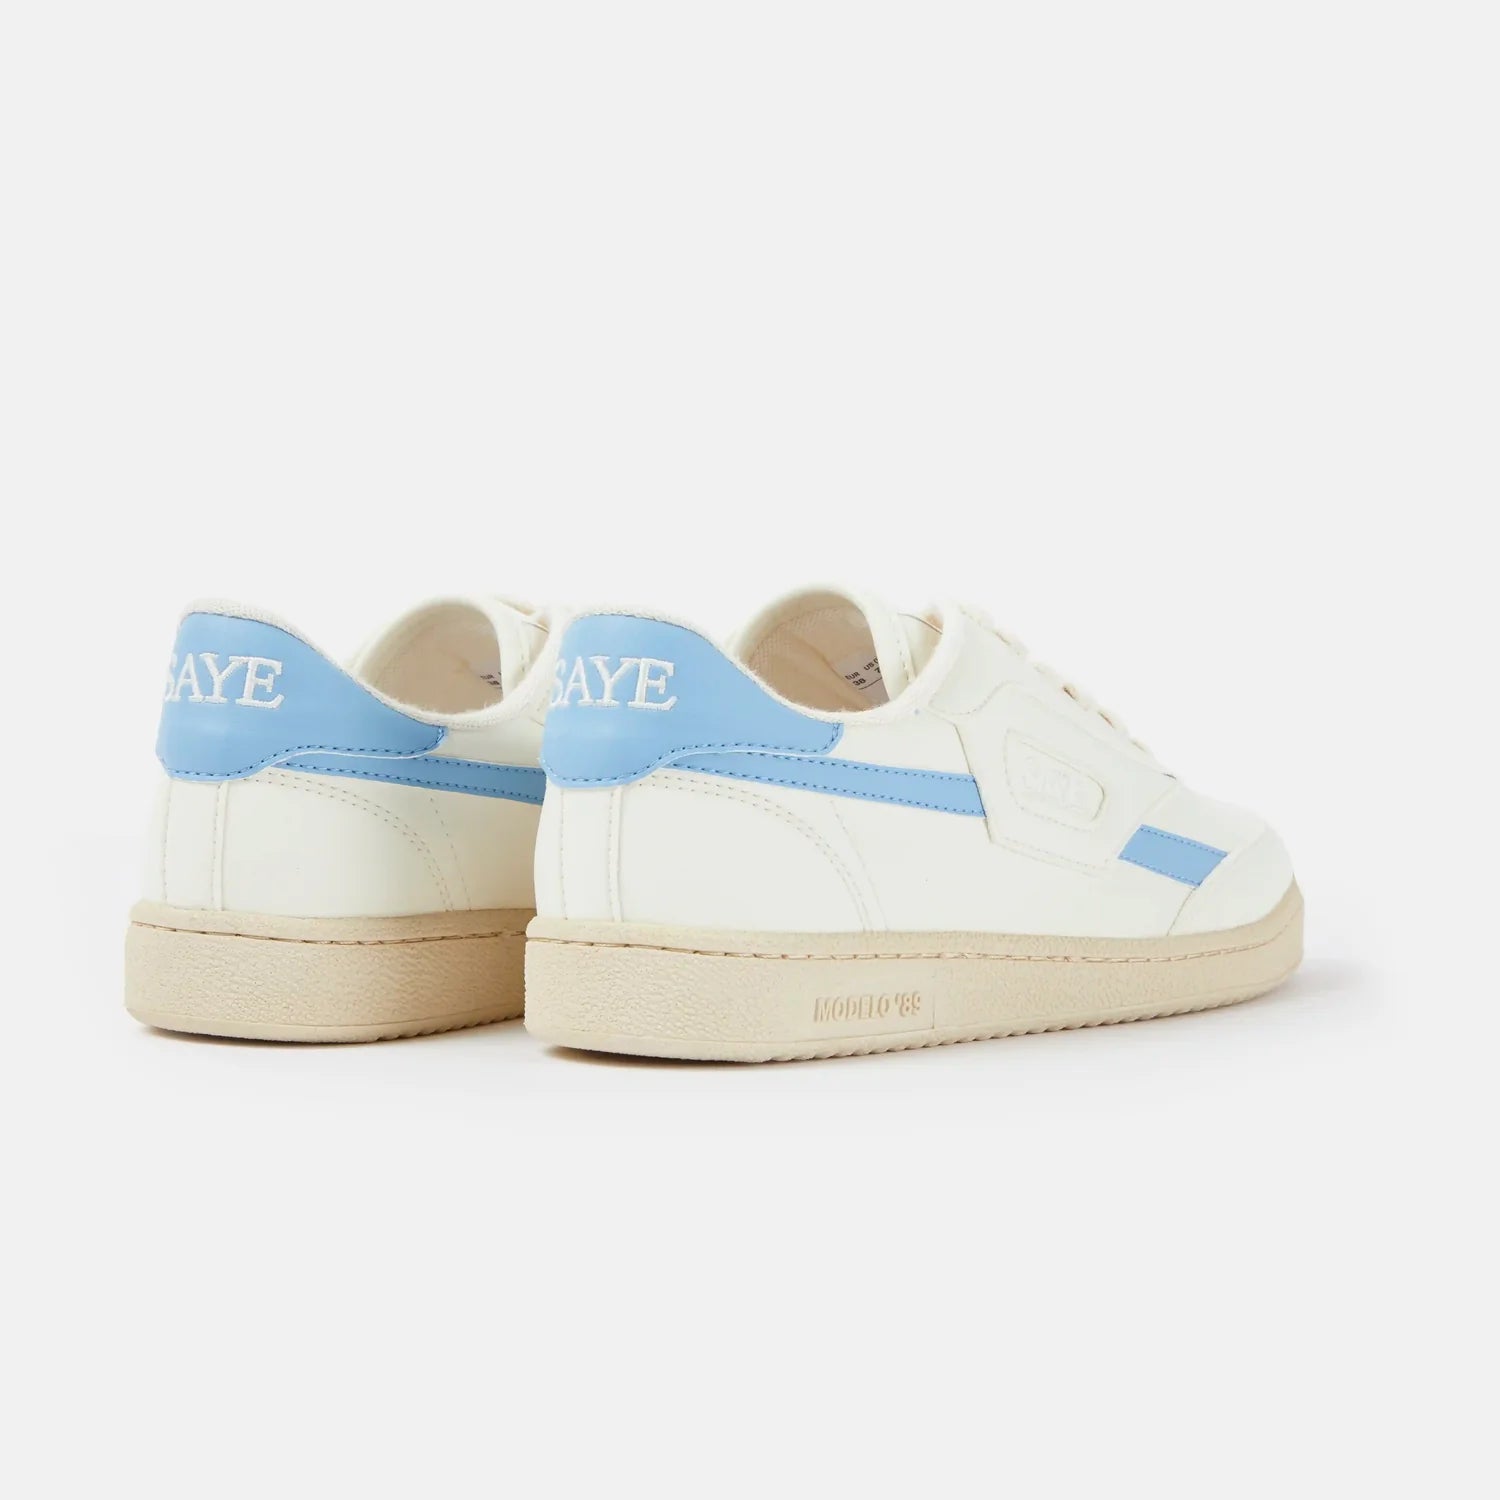 Off white sneakers with light blue side detail